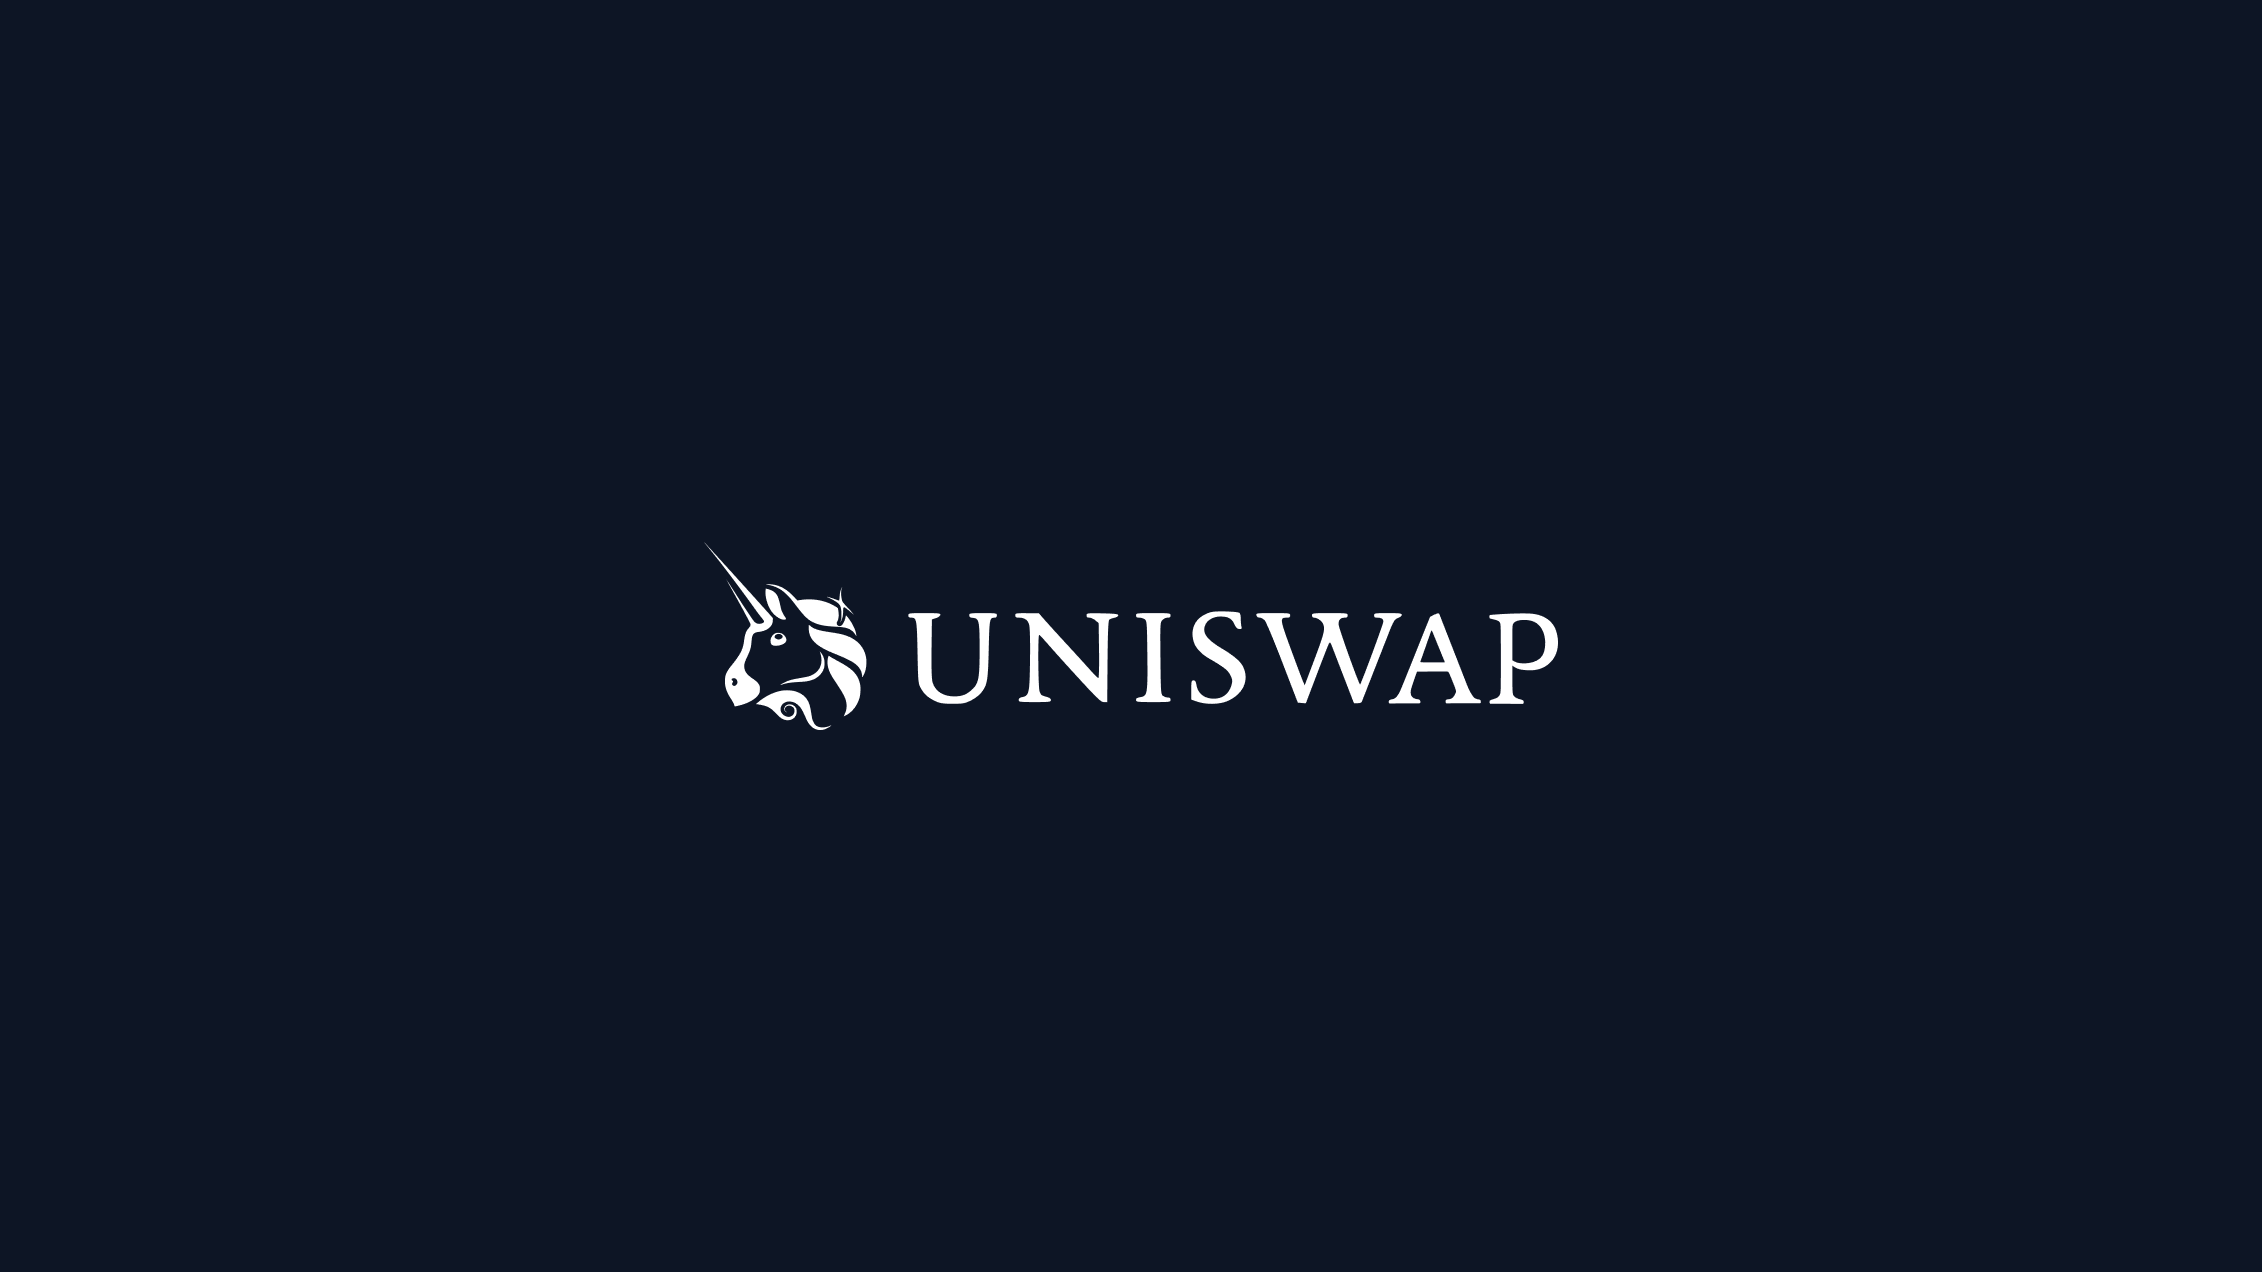 Uniswap relies on Center to seamlessly display NFT media